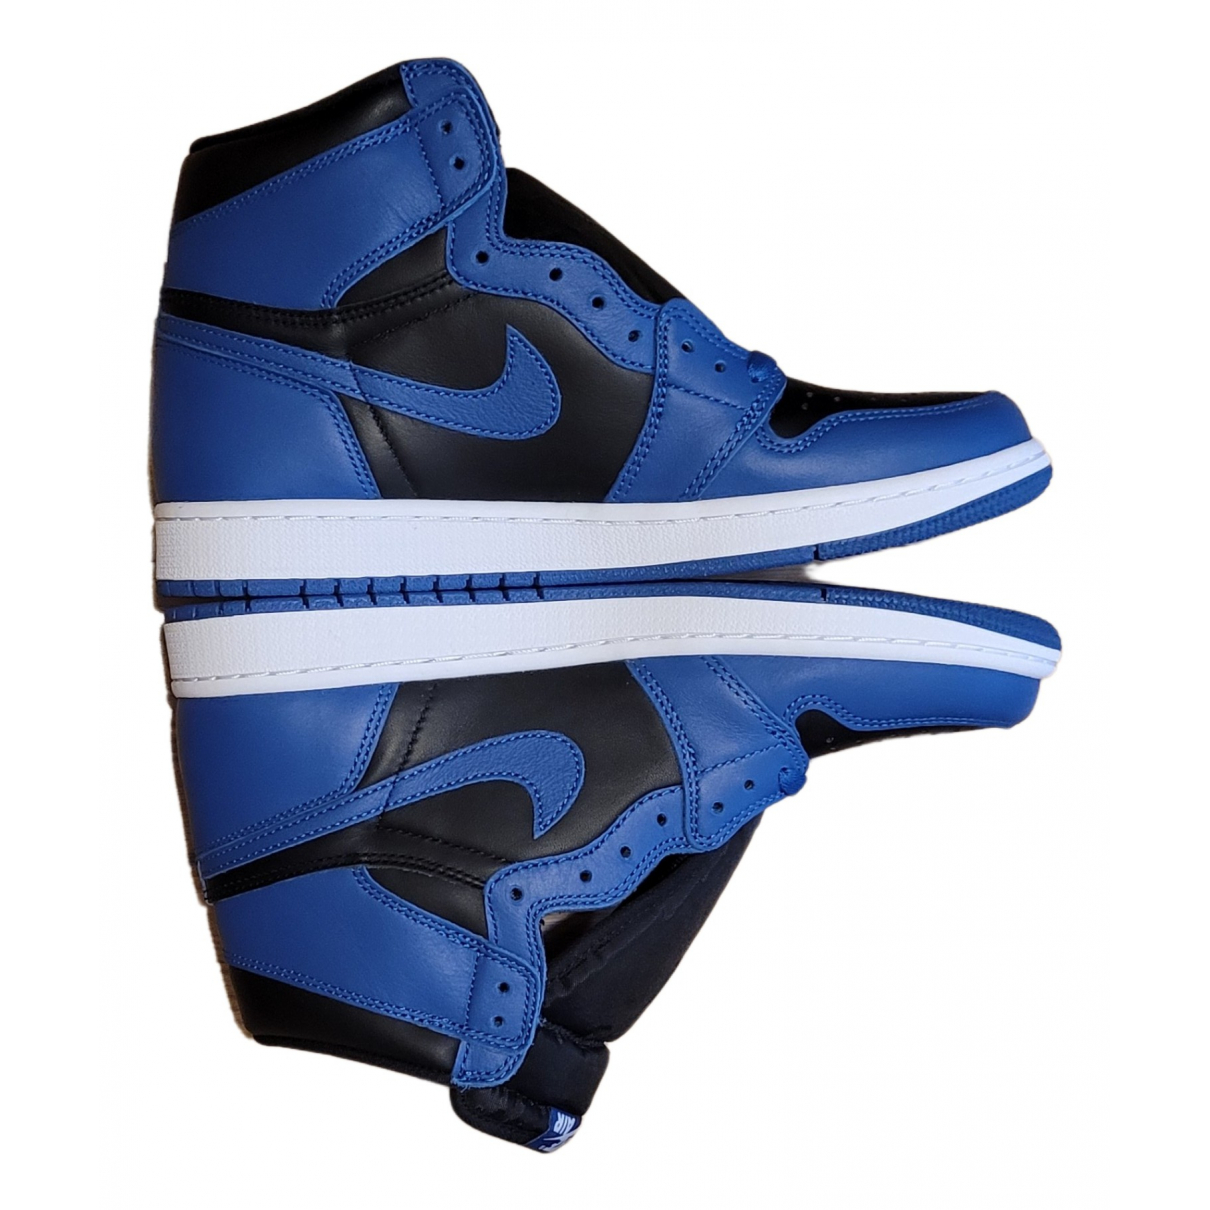 Air Jordan 1 high Max 65% OFF trainers leather In a popularity